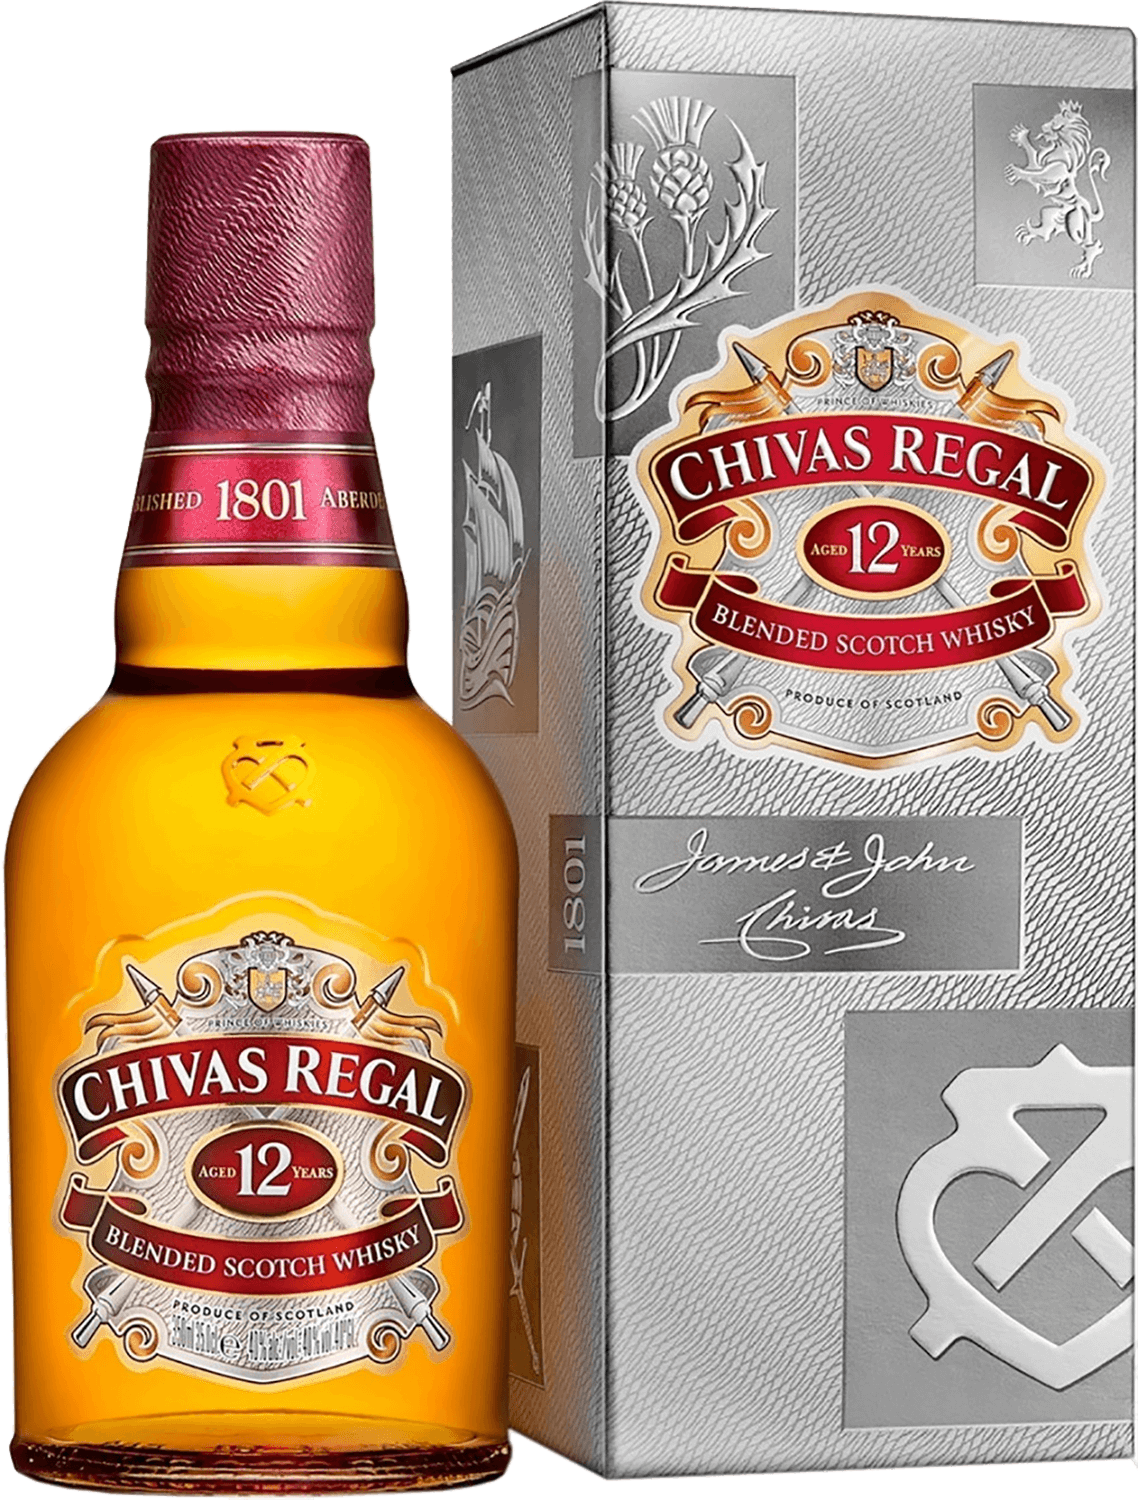 Chivas Regal Blended Scotch Whisky 12 y.o. (gift box) chivas regal blended scotch whisky 12 y o gift box